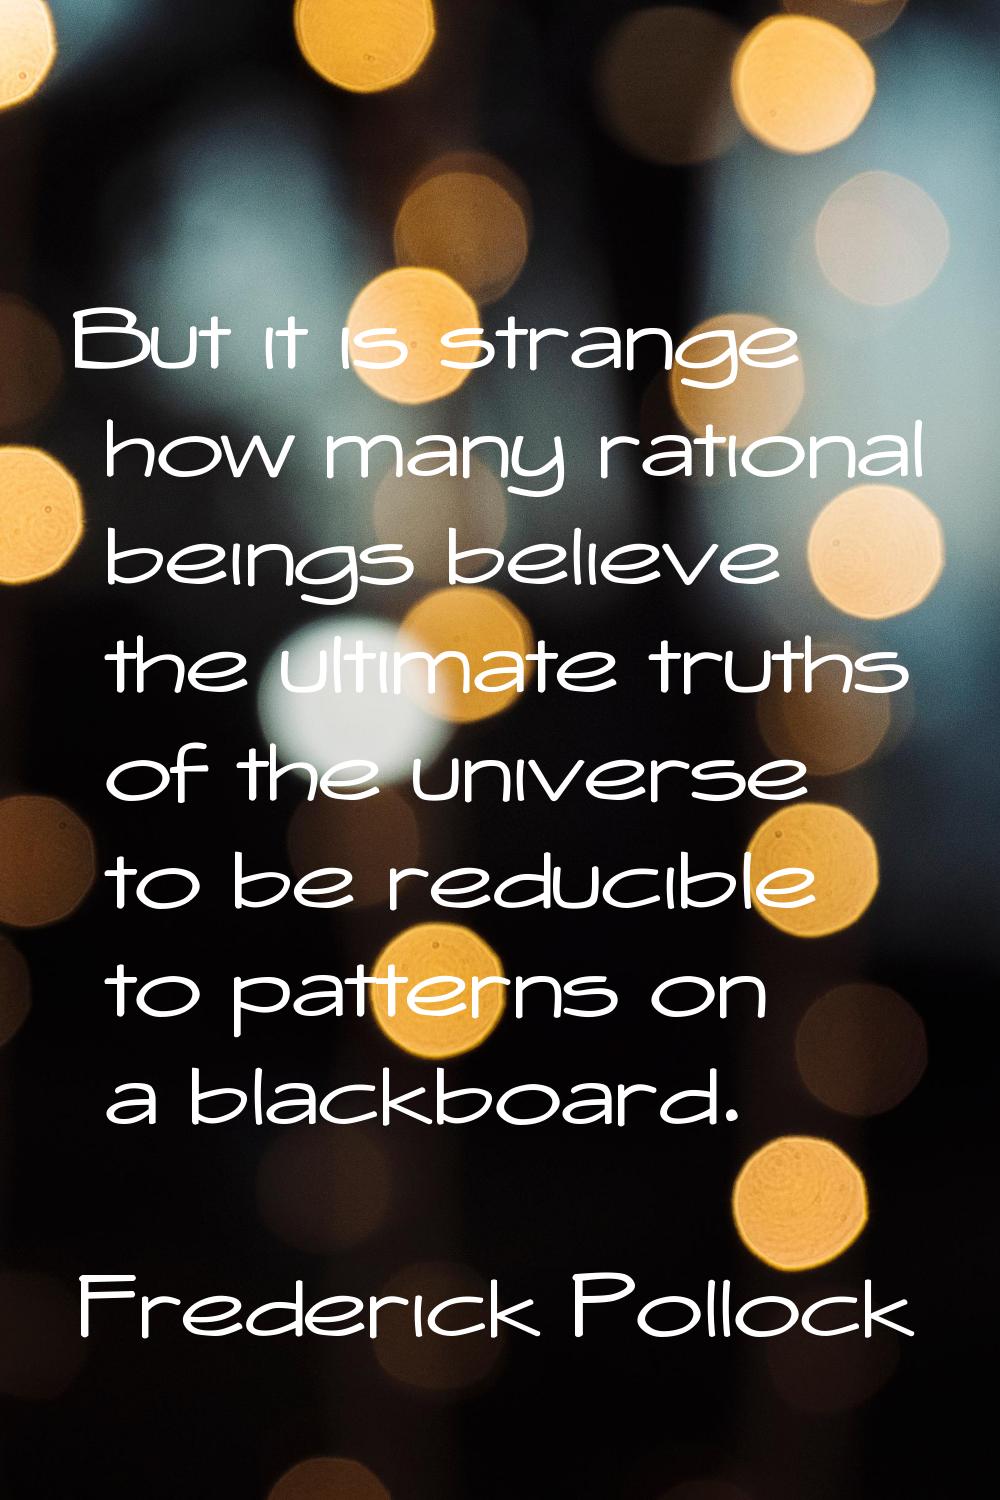 But it is strange how many rational beings believe the ultimate truths of the universe to be reduci